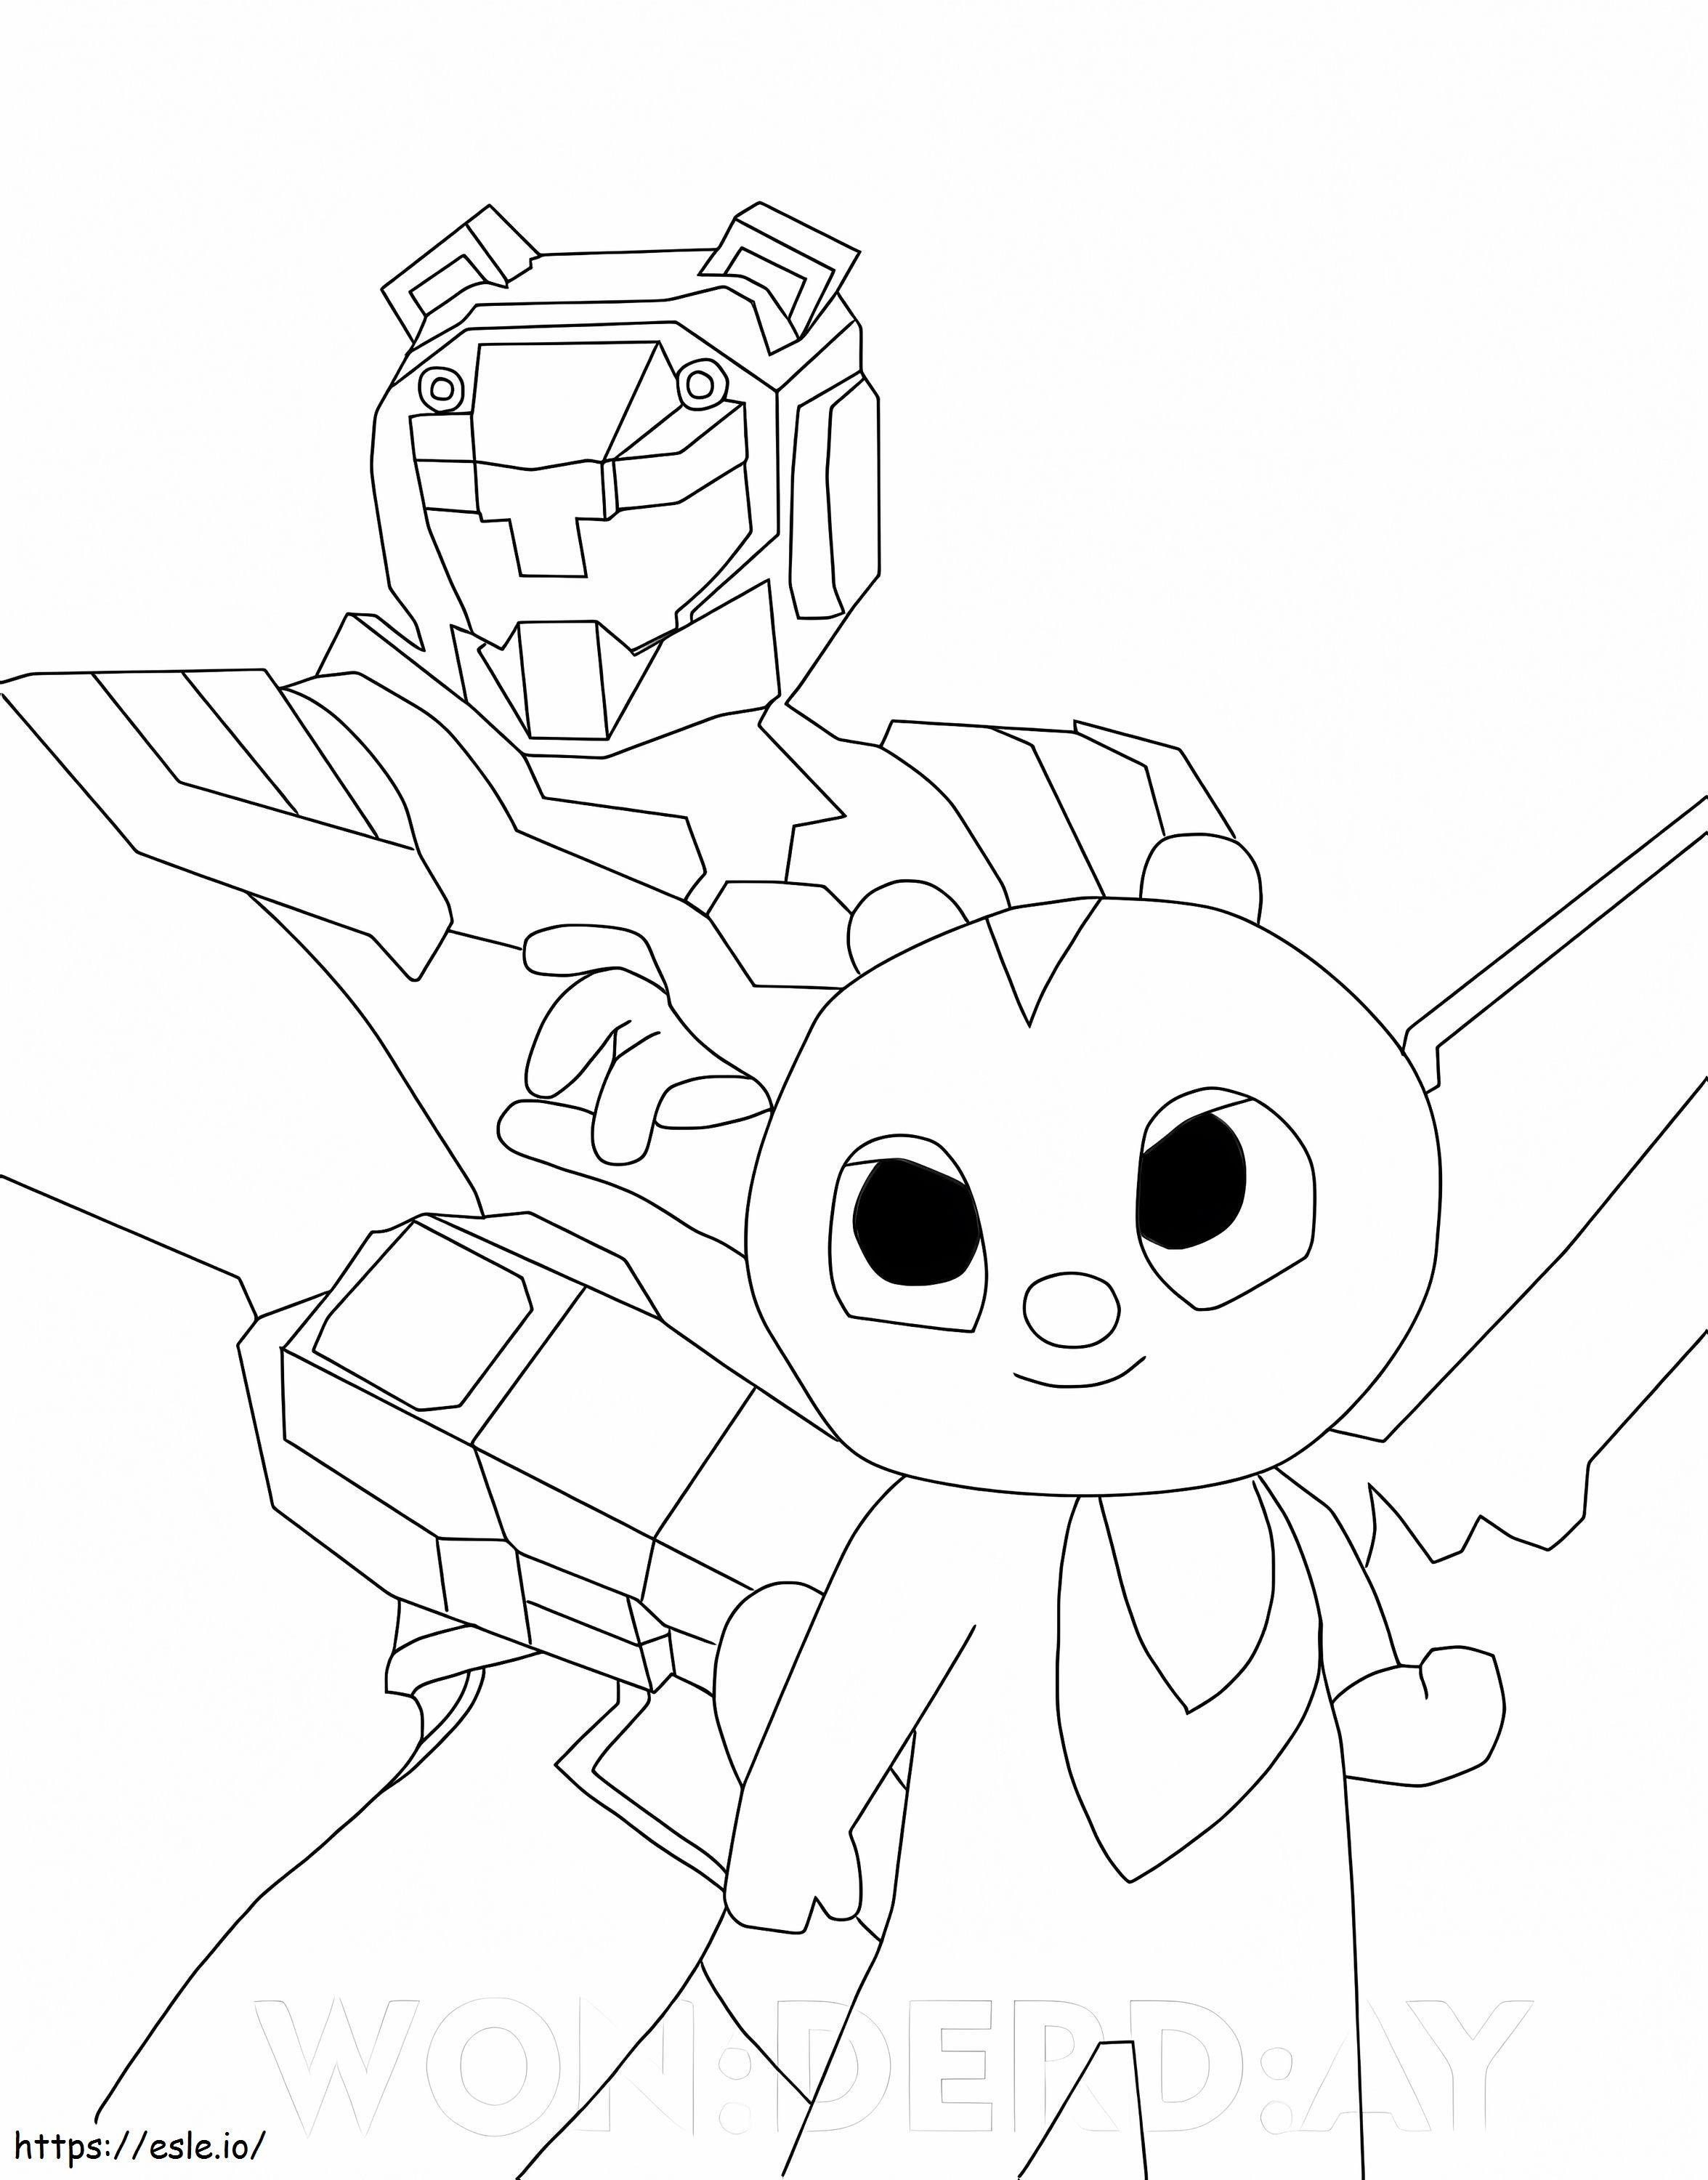 Max From Miniforce coloring page